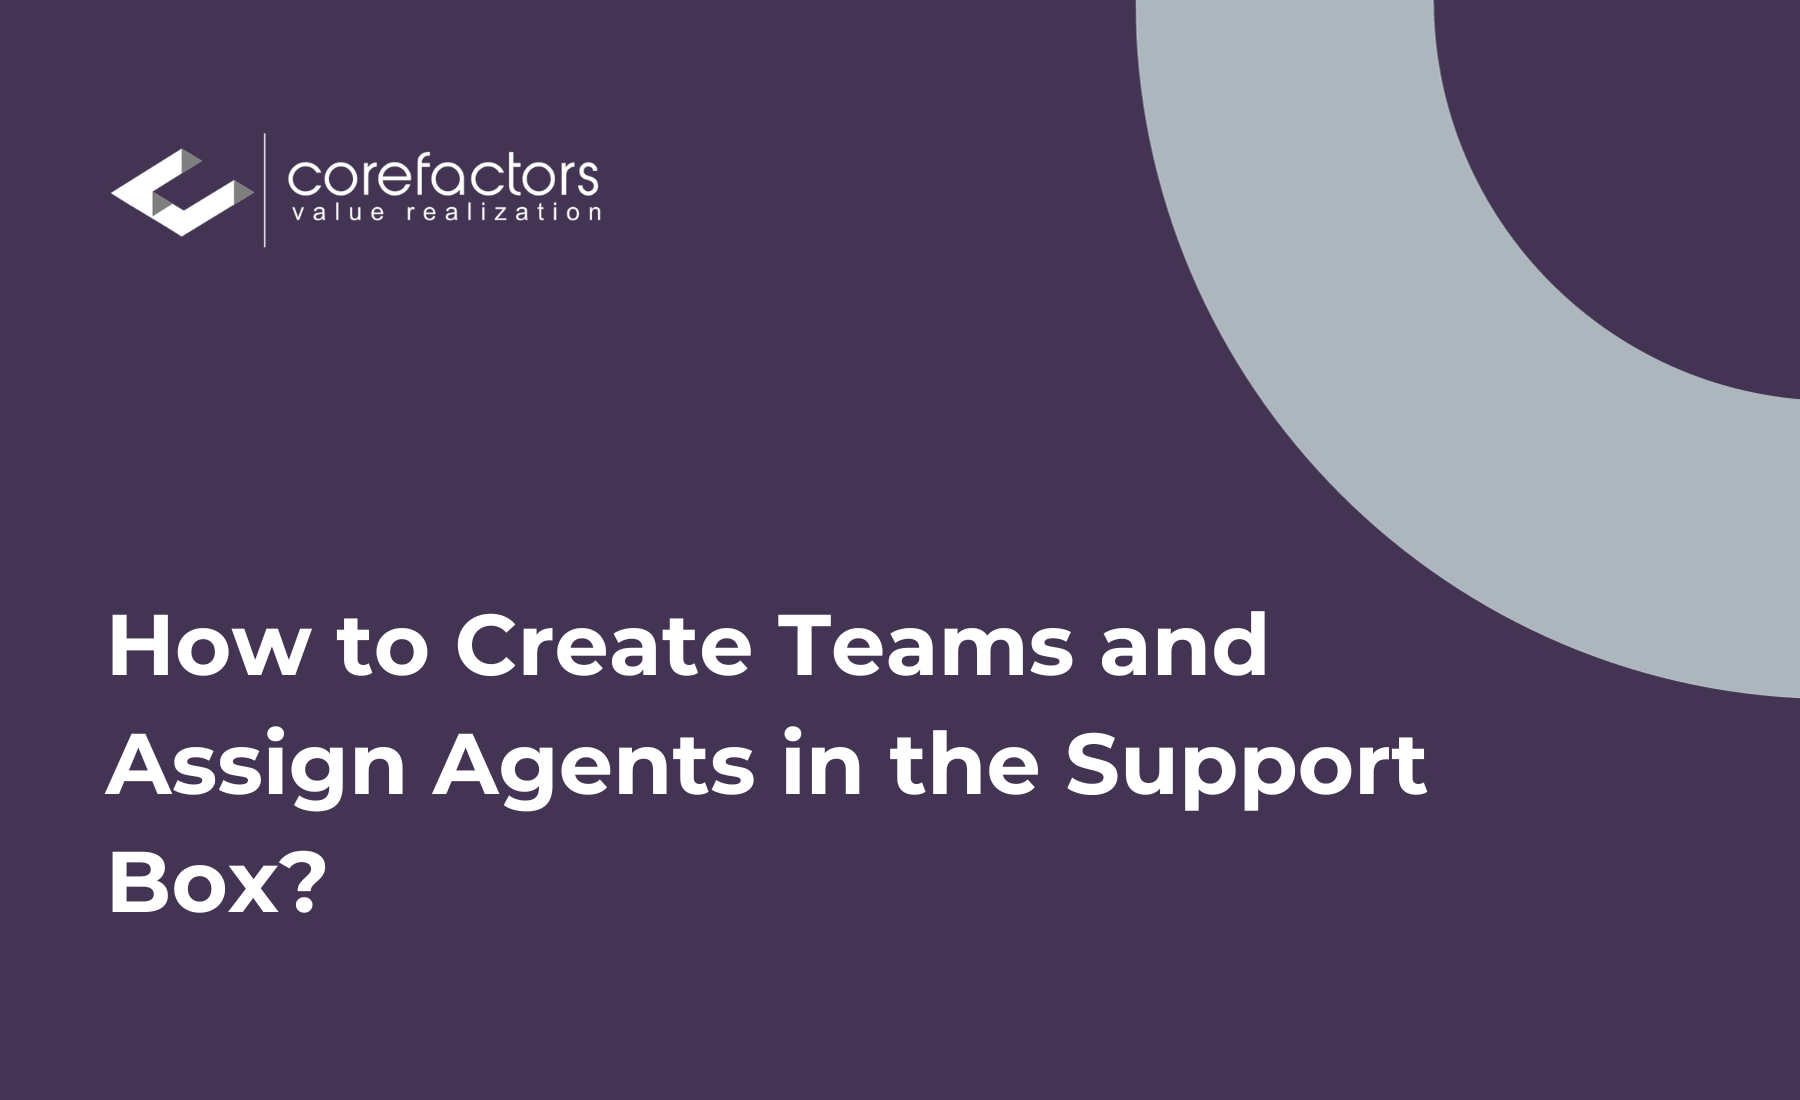 How to create teams and assign agents in the support box?